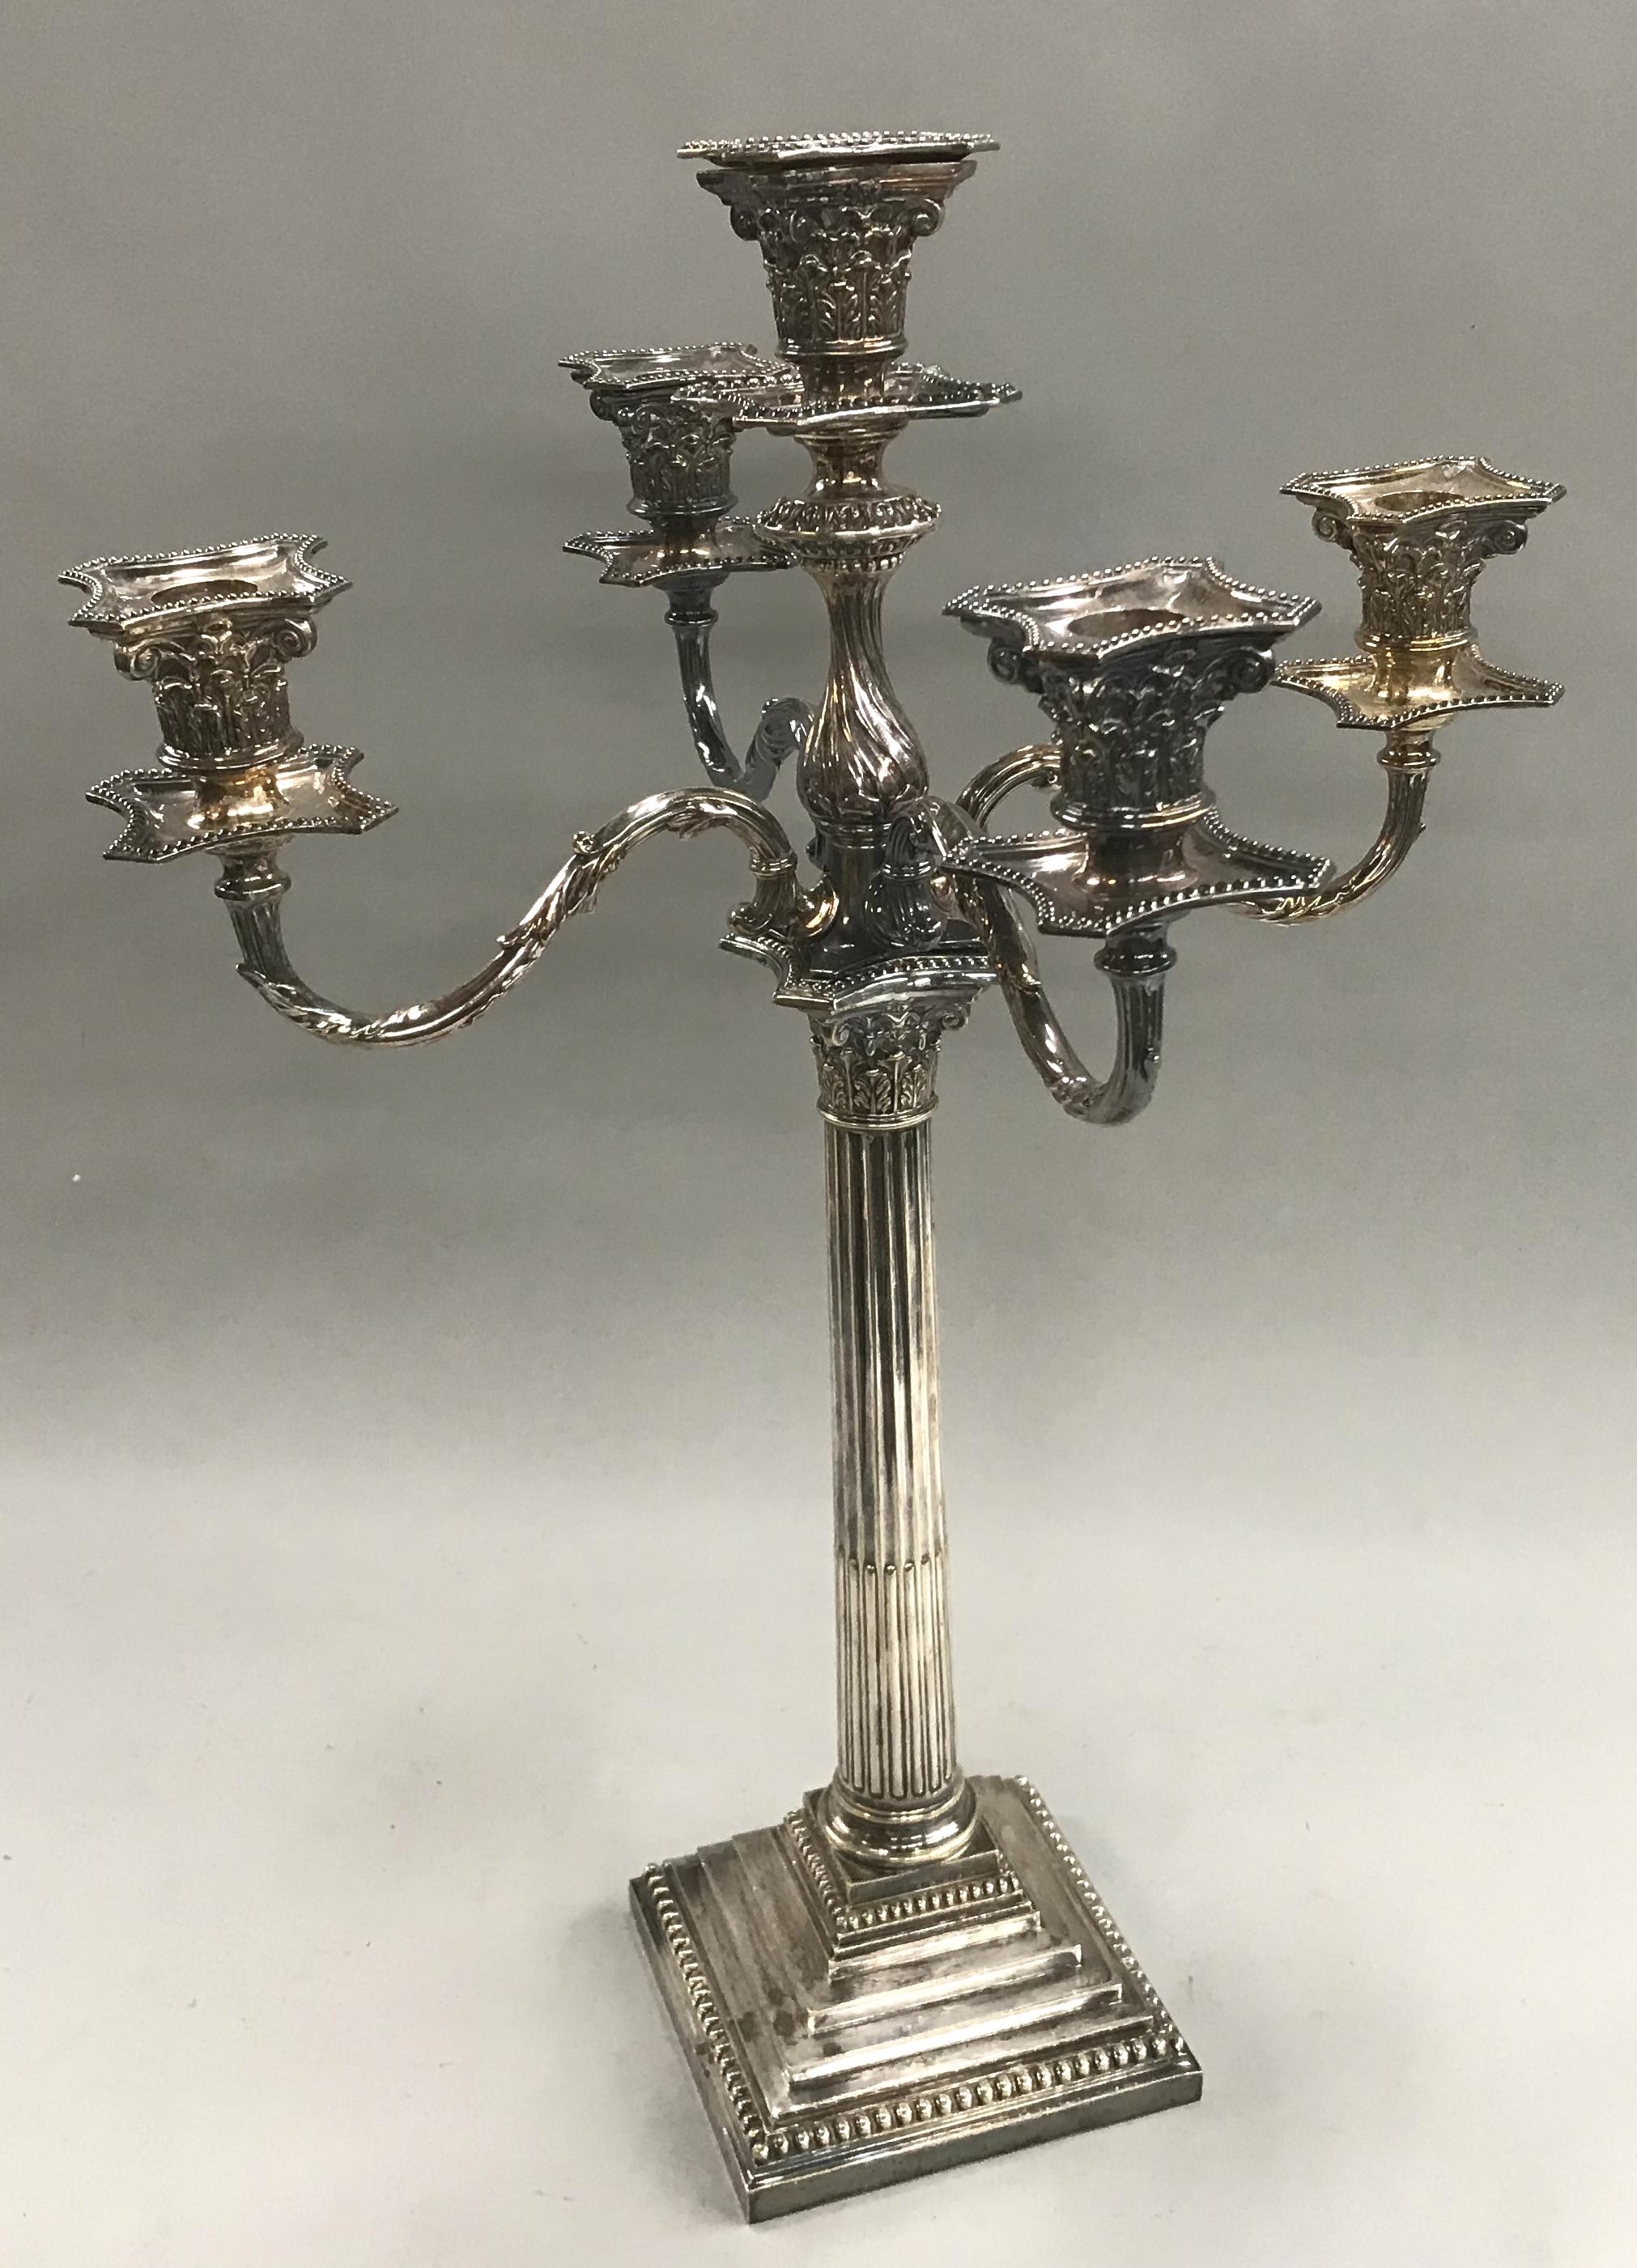 A fine five-light Sheffield silver candelabrum with Corinthian capitals and stepped base, hallmarked by Hawksworth, Eyre, & Co. Charles Hawksworth and John Eyre created the firm in 1833 and registered their first mark in 1862. In 1869 the